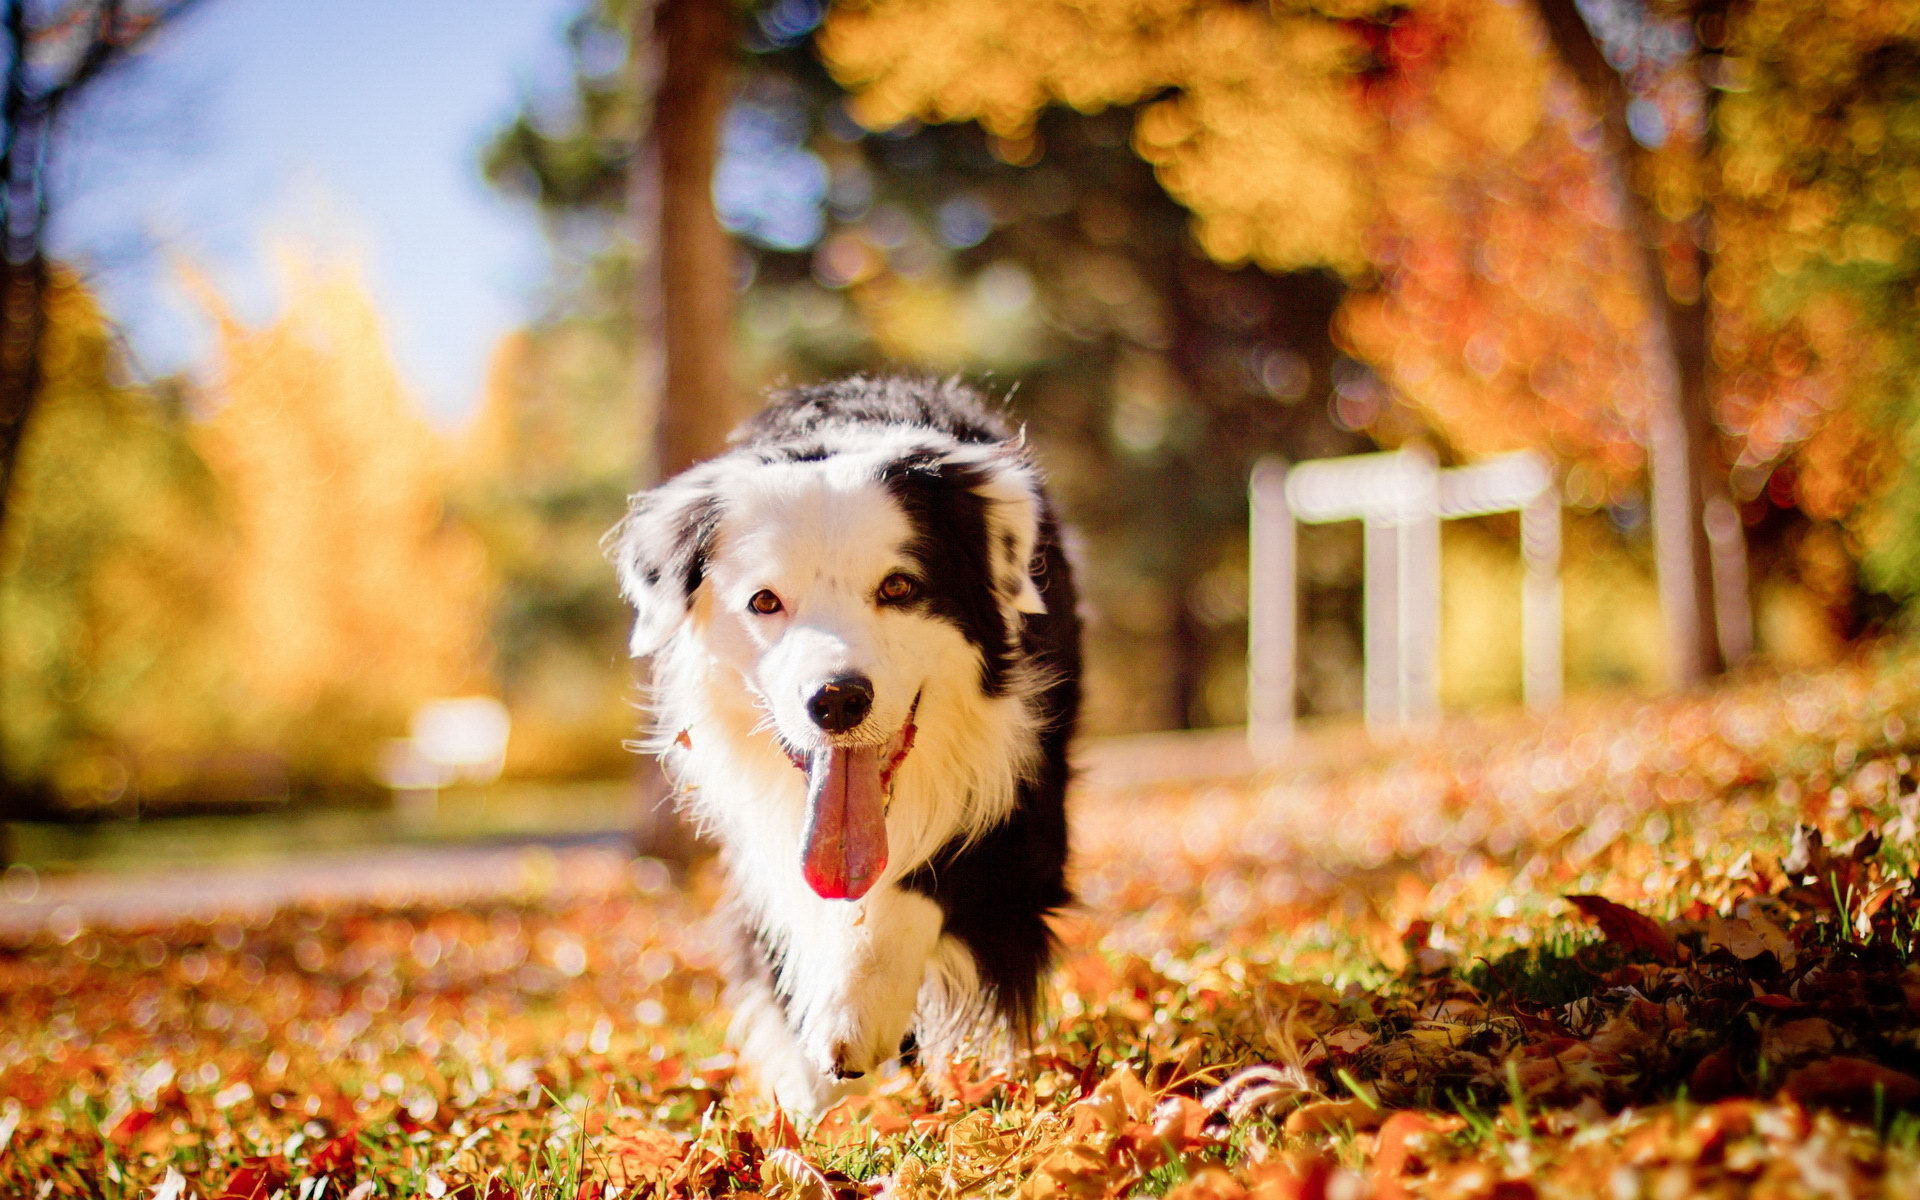 Cute dog in romantic autumn wallpapers and images - wallpapers ...